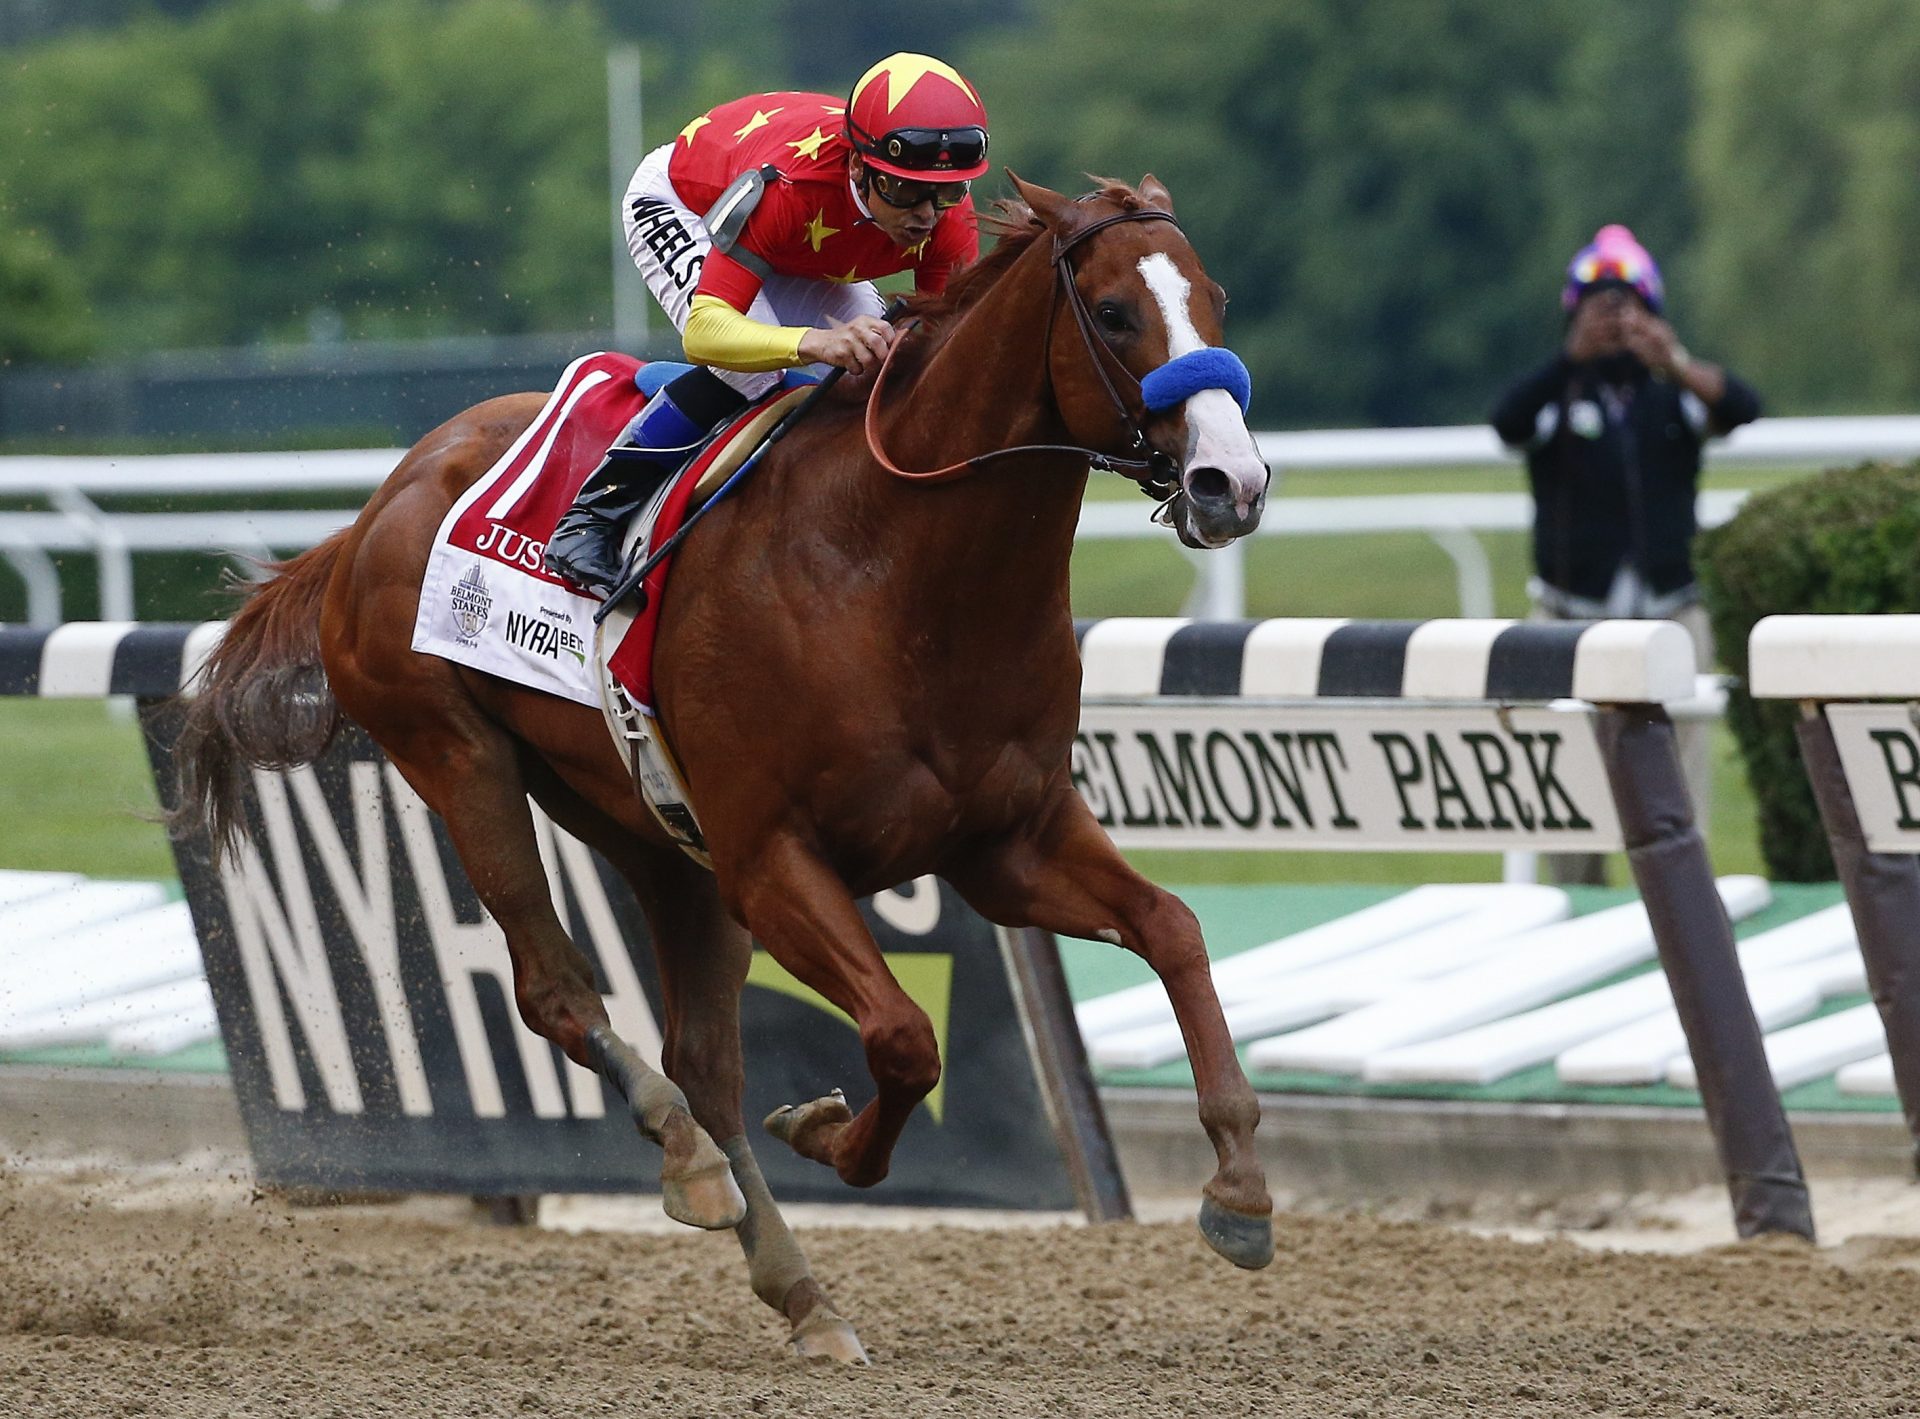 Justify (1), with jockey Mike Smith up, crosses the finish line to win the 150th running of the Belmont Stakes horse race and the Triple Crown, Saturday, June 9, 2018, in Elmont, N.Y.